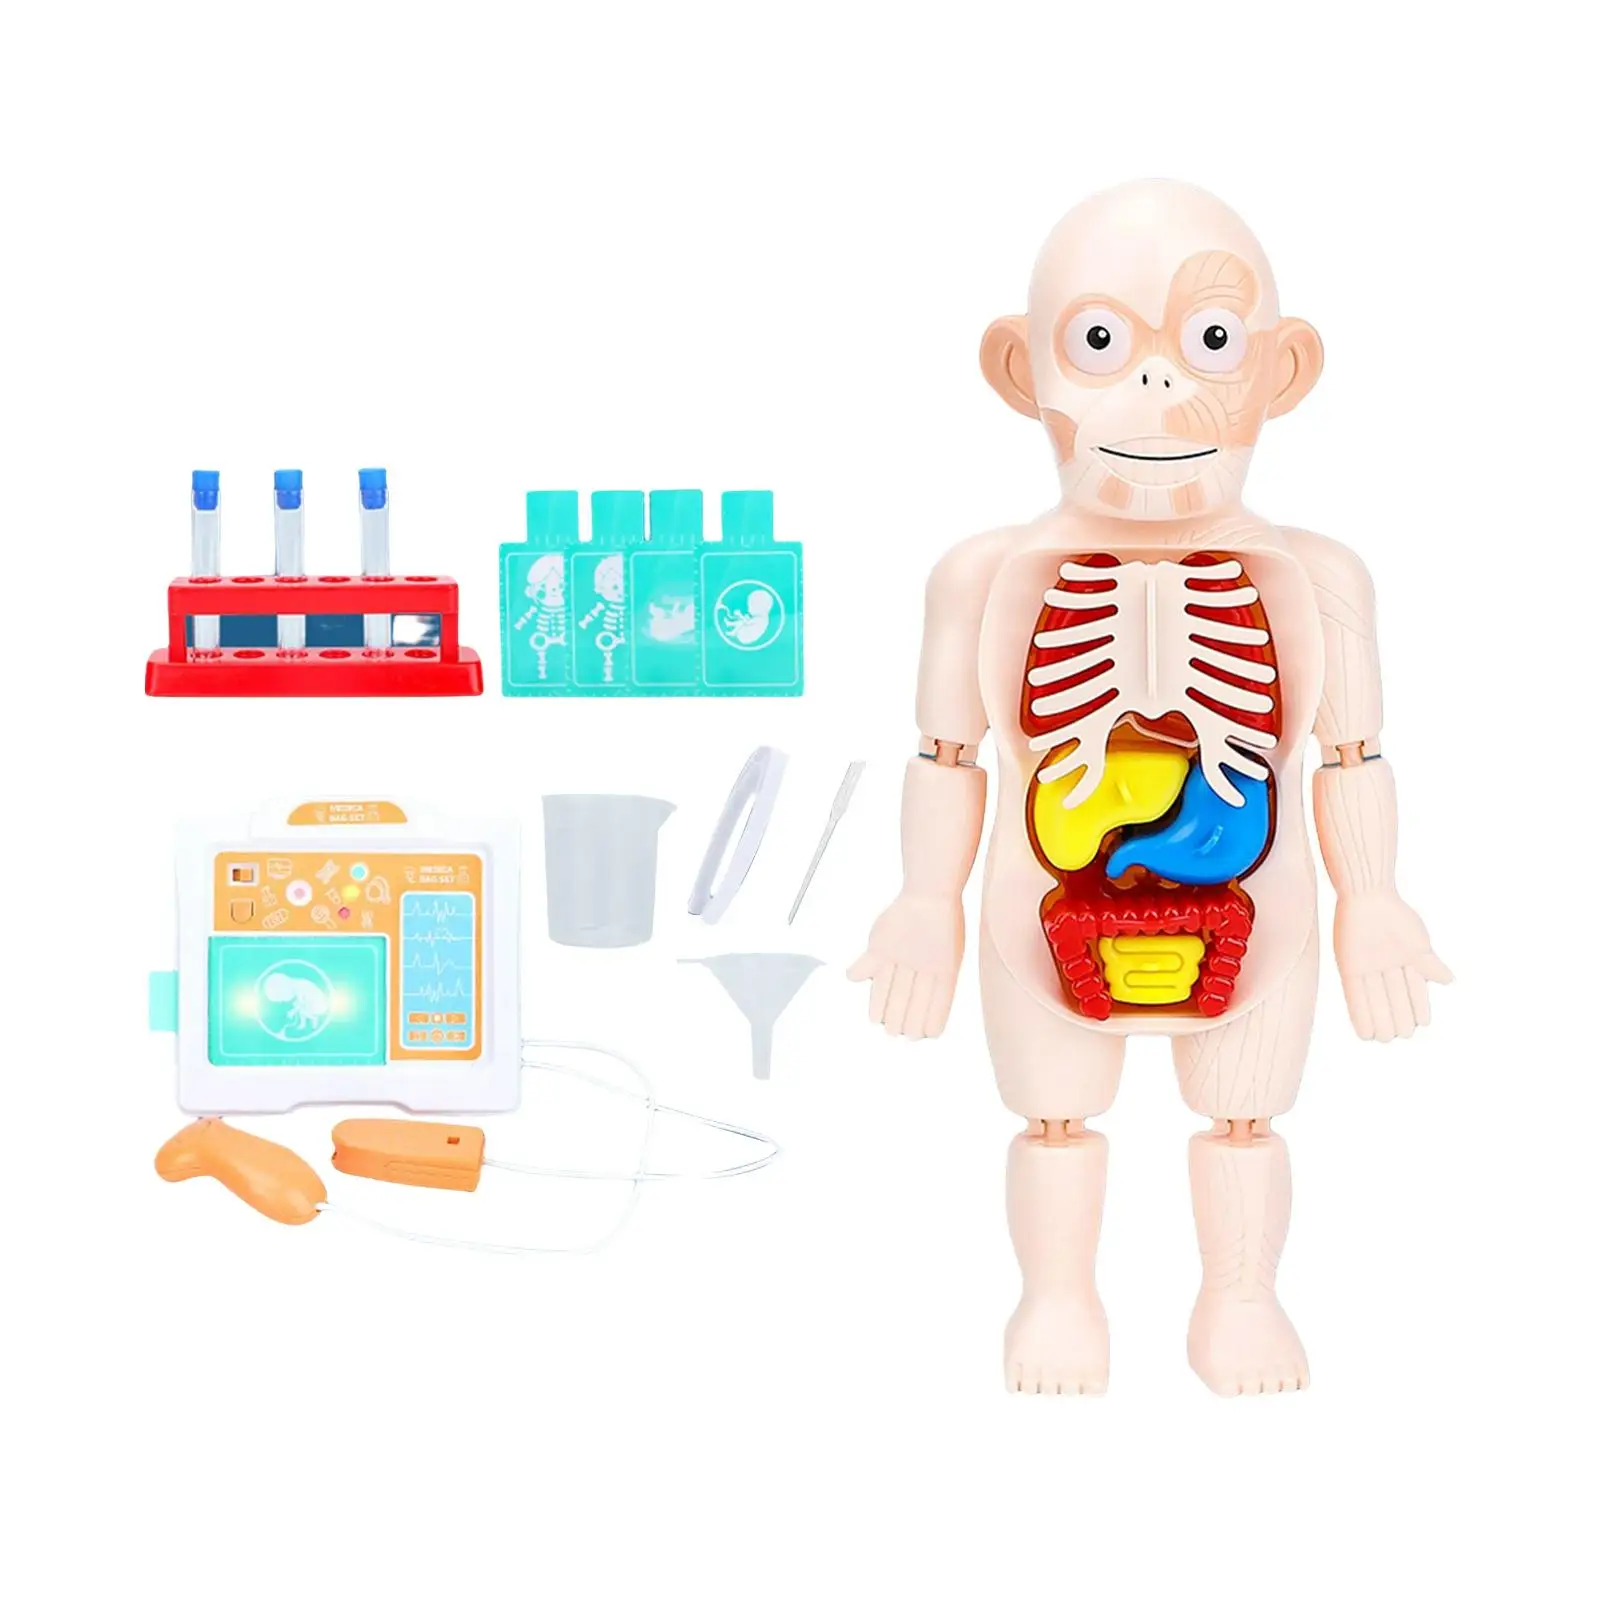 Human Body Model Development Toy Learning Activities Practical for Classroom